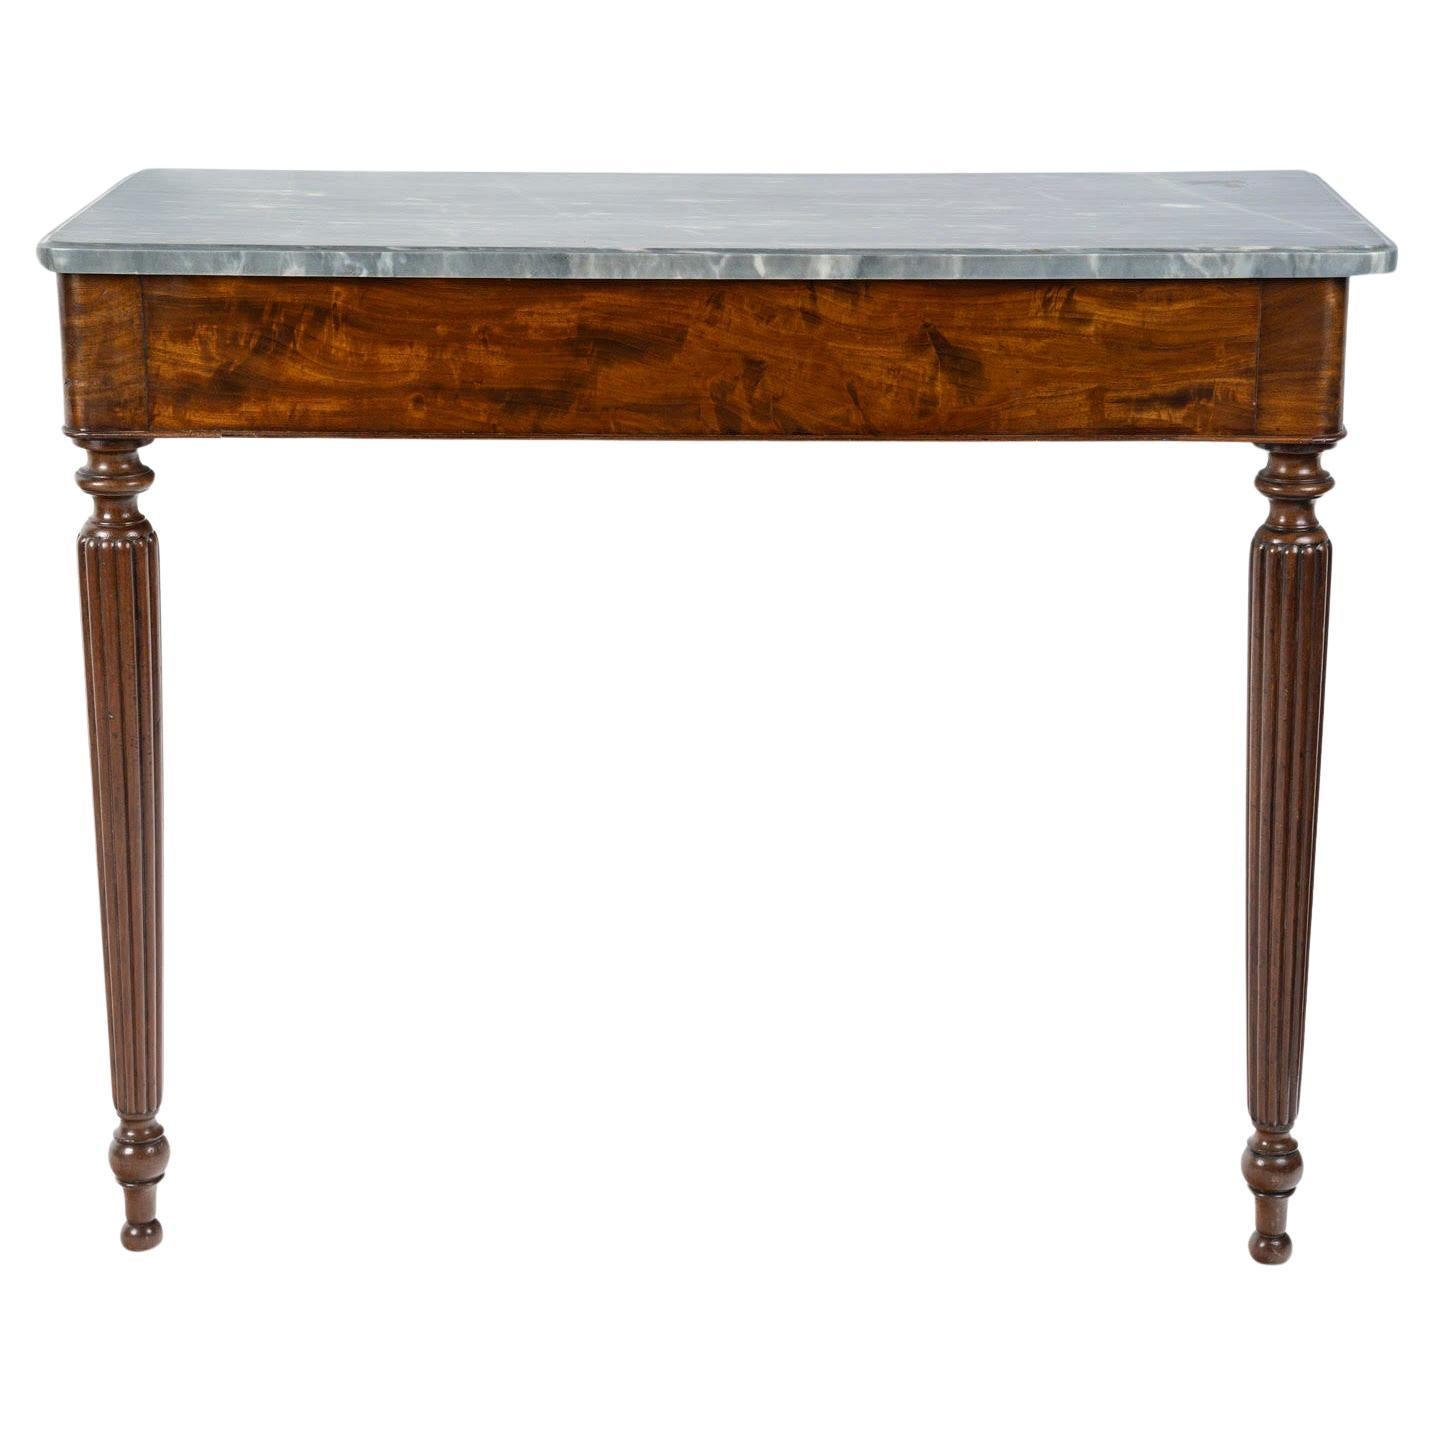 A Louis Philippe Period Mahogany and Marble Top Console Table, 19th Century.